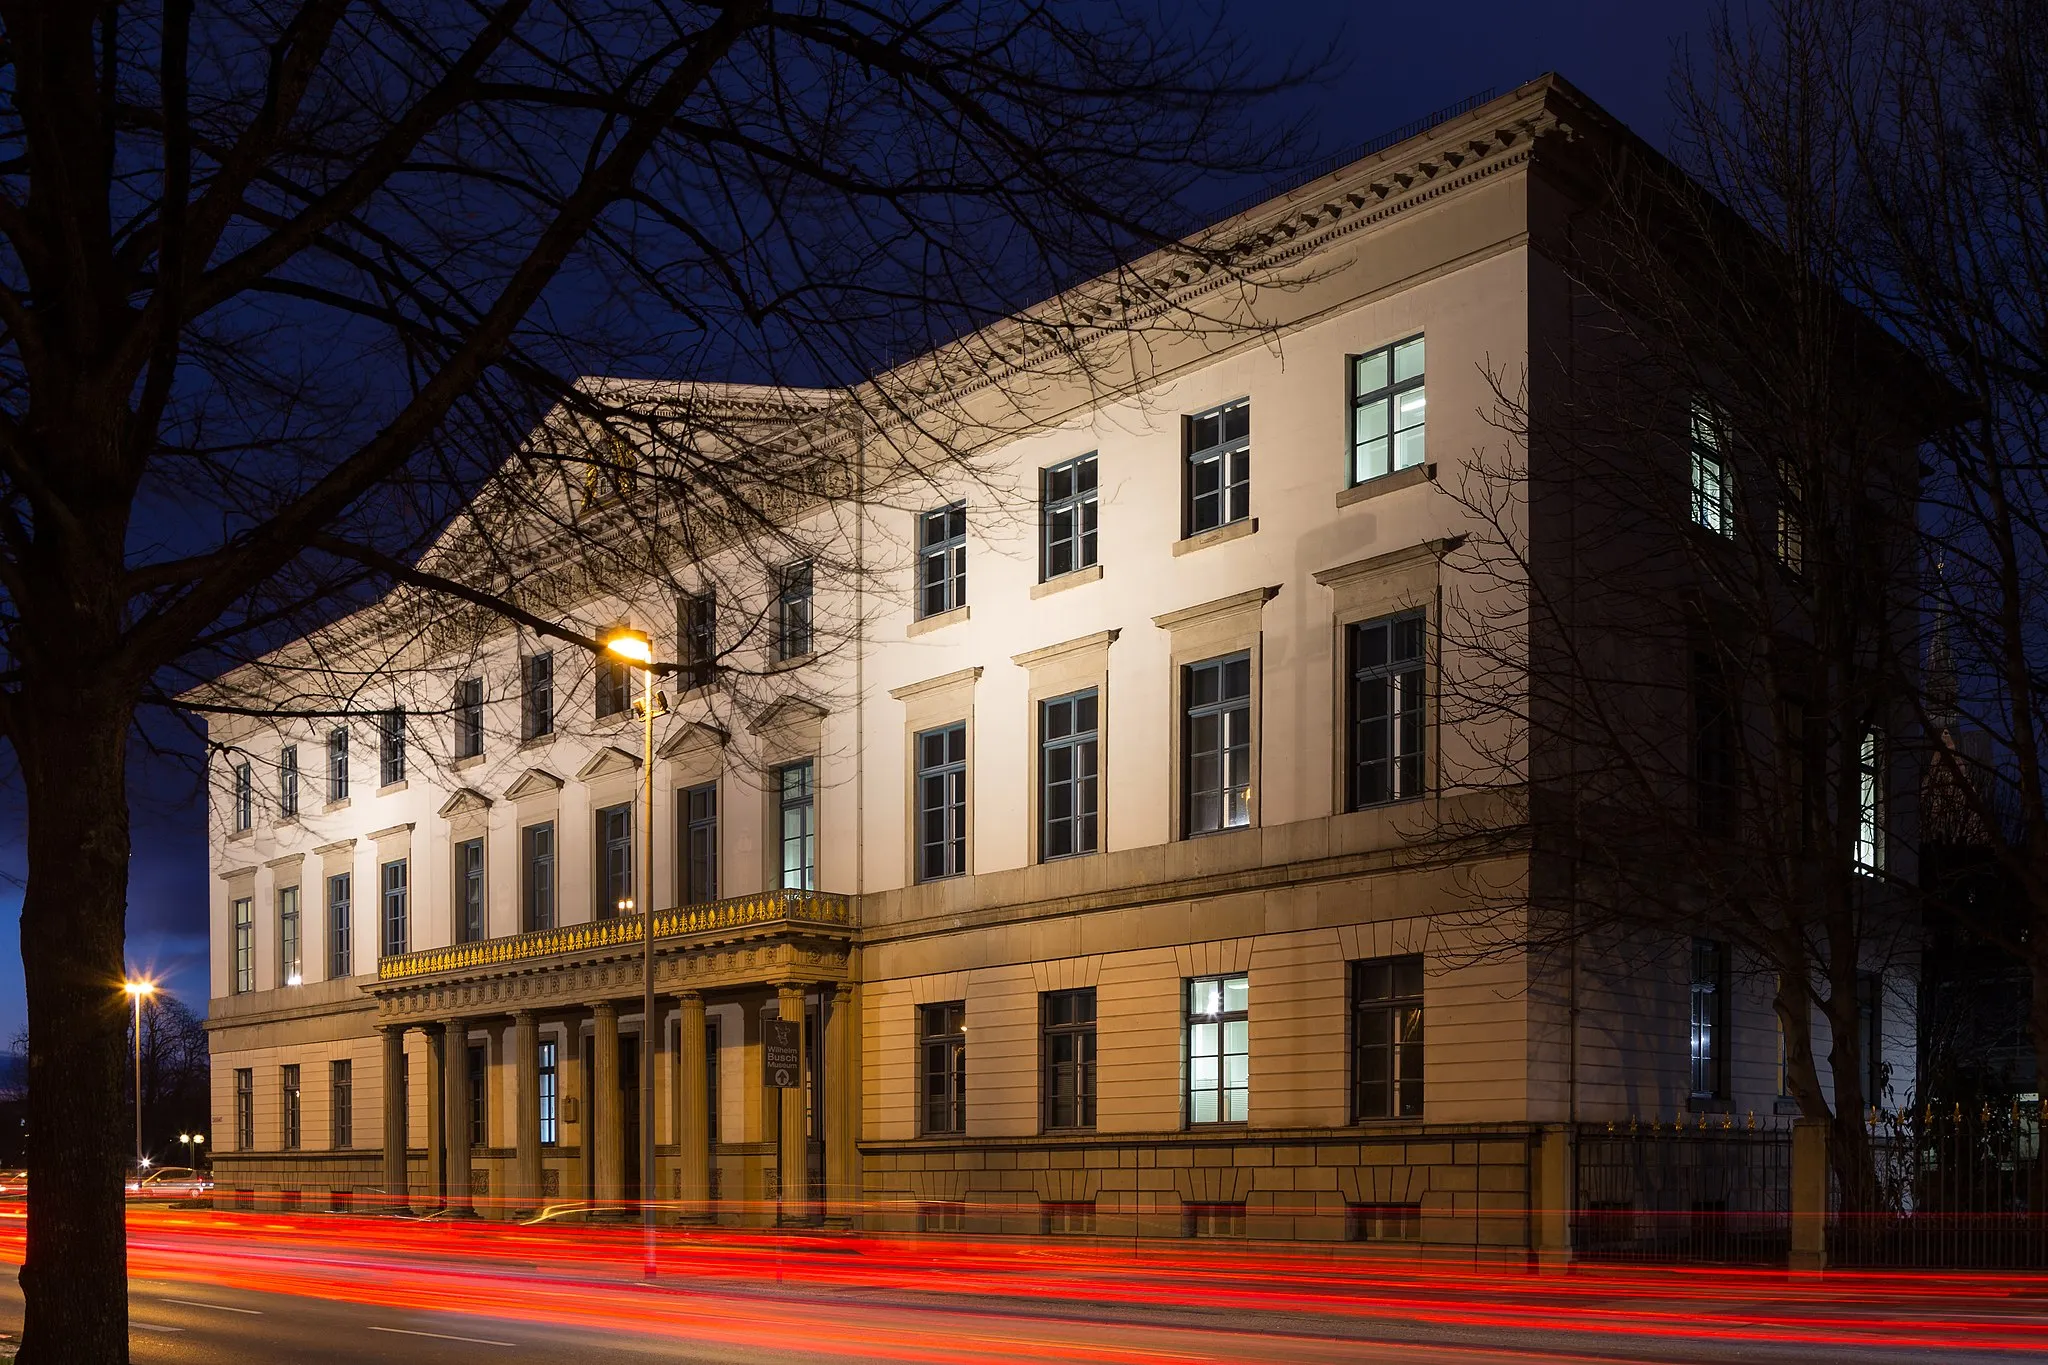 Photo showing: Wangenheimpalais building located at Friedrichswall road in Mitte district of Hanover, Germany.